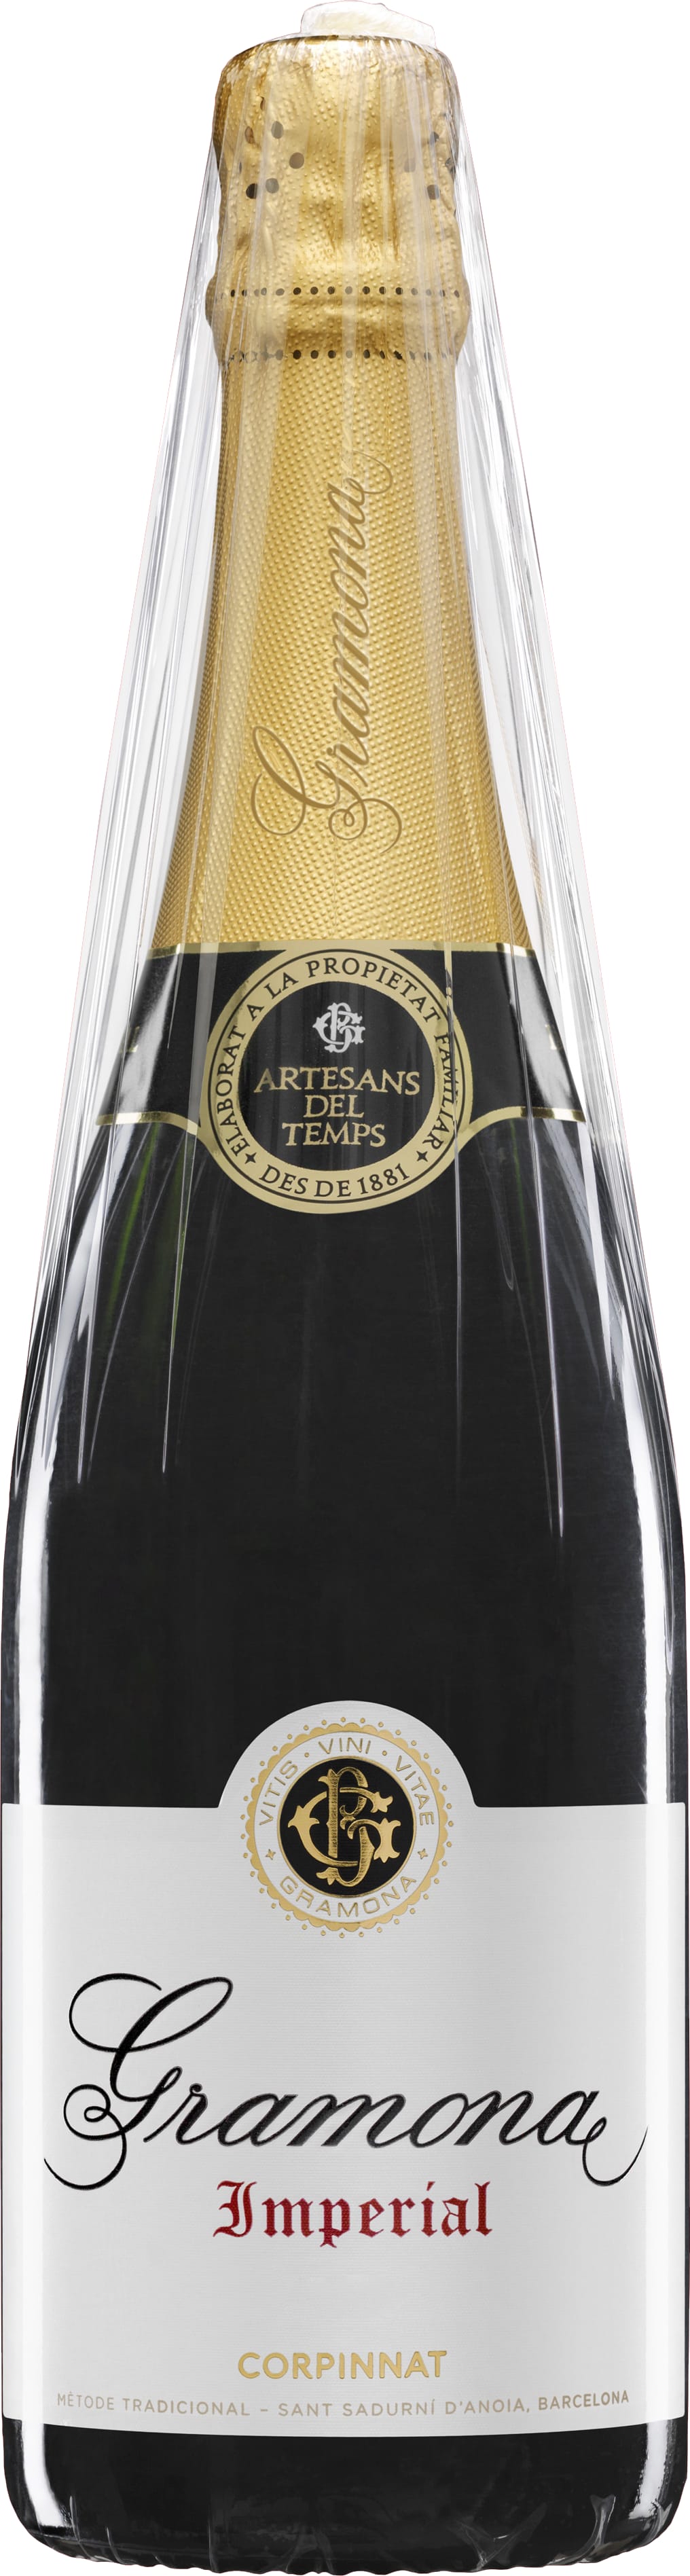 Gramona Imperial Brut Organic 2017 75cl - Buy Gramona Wines from GREAT WINES DIRECT wine shop